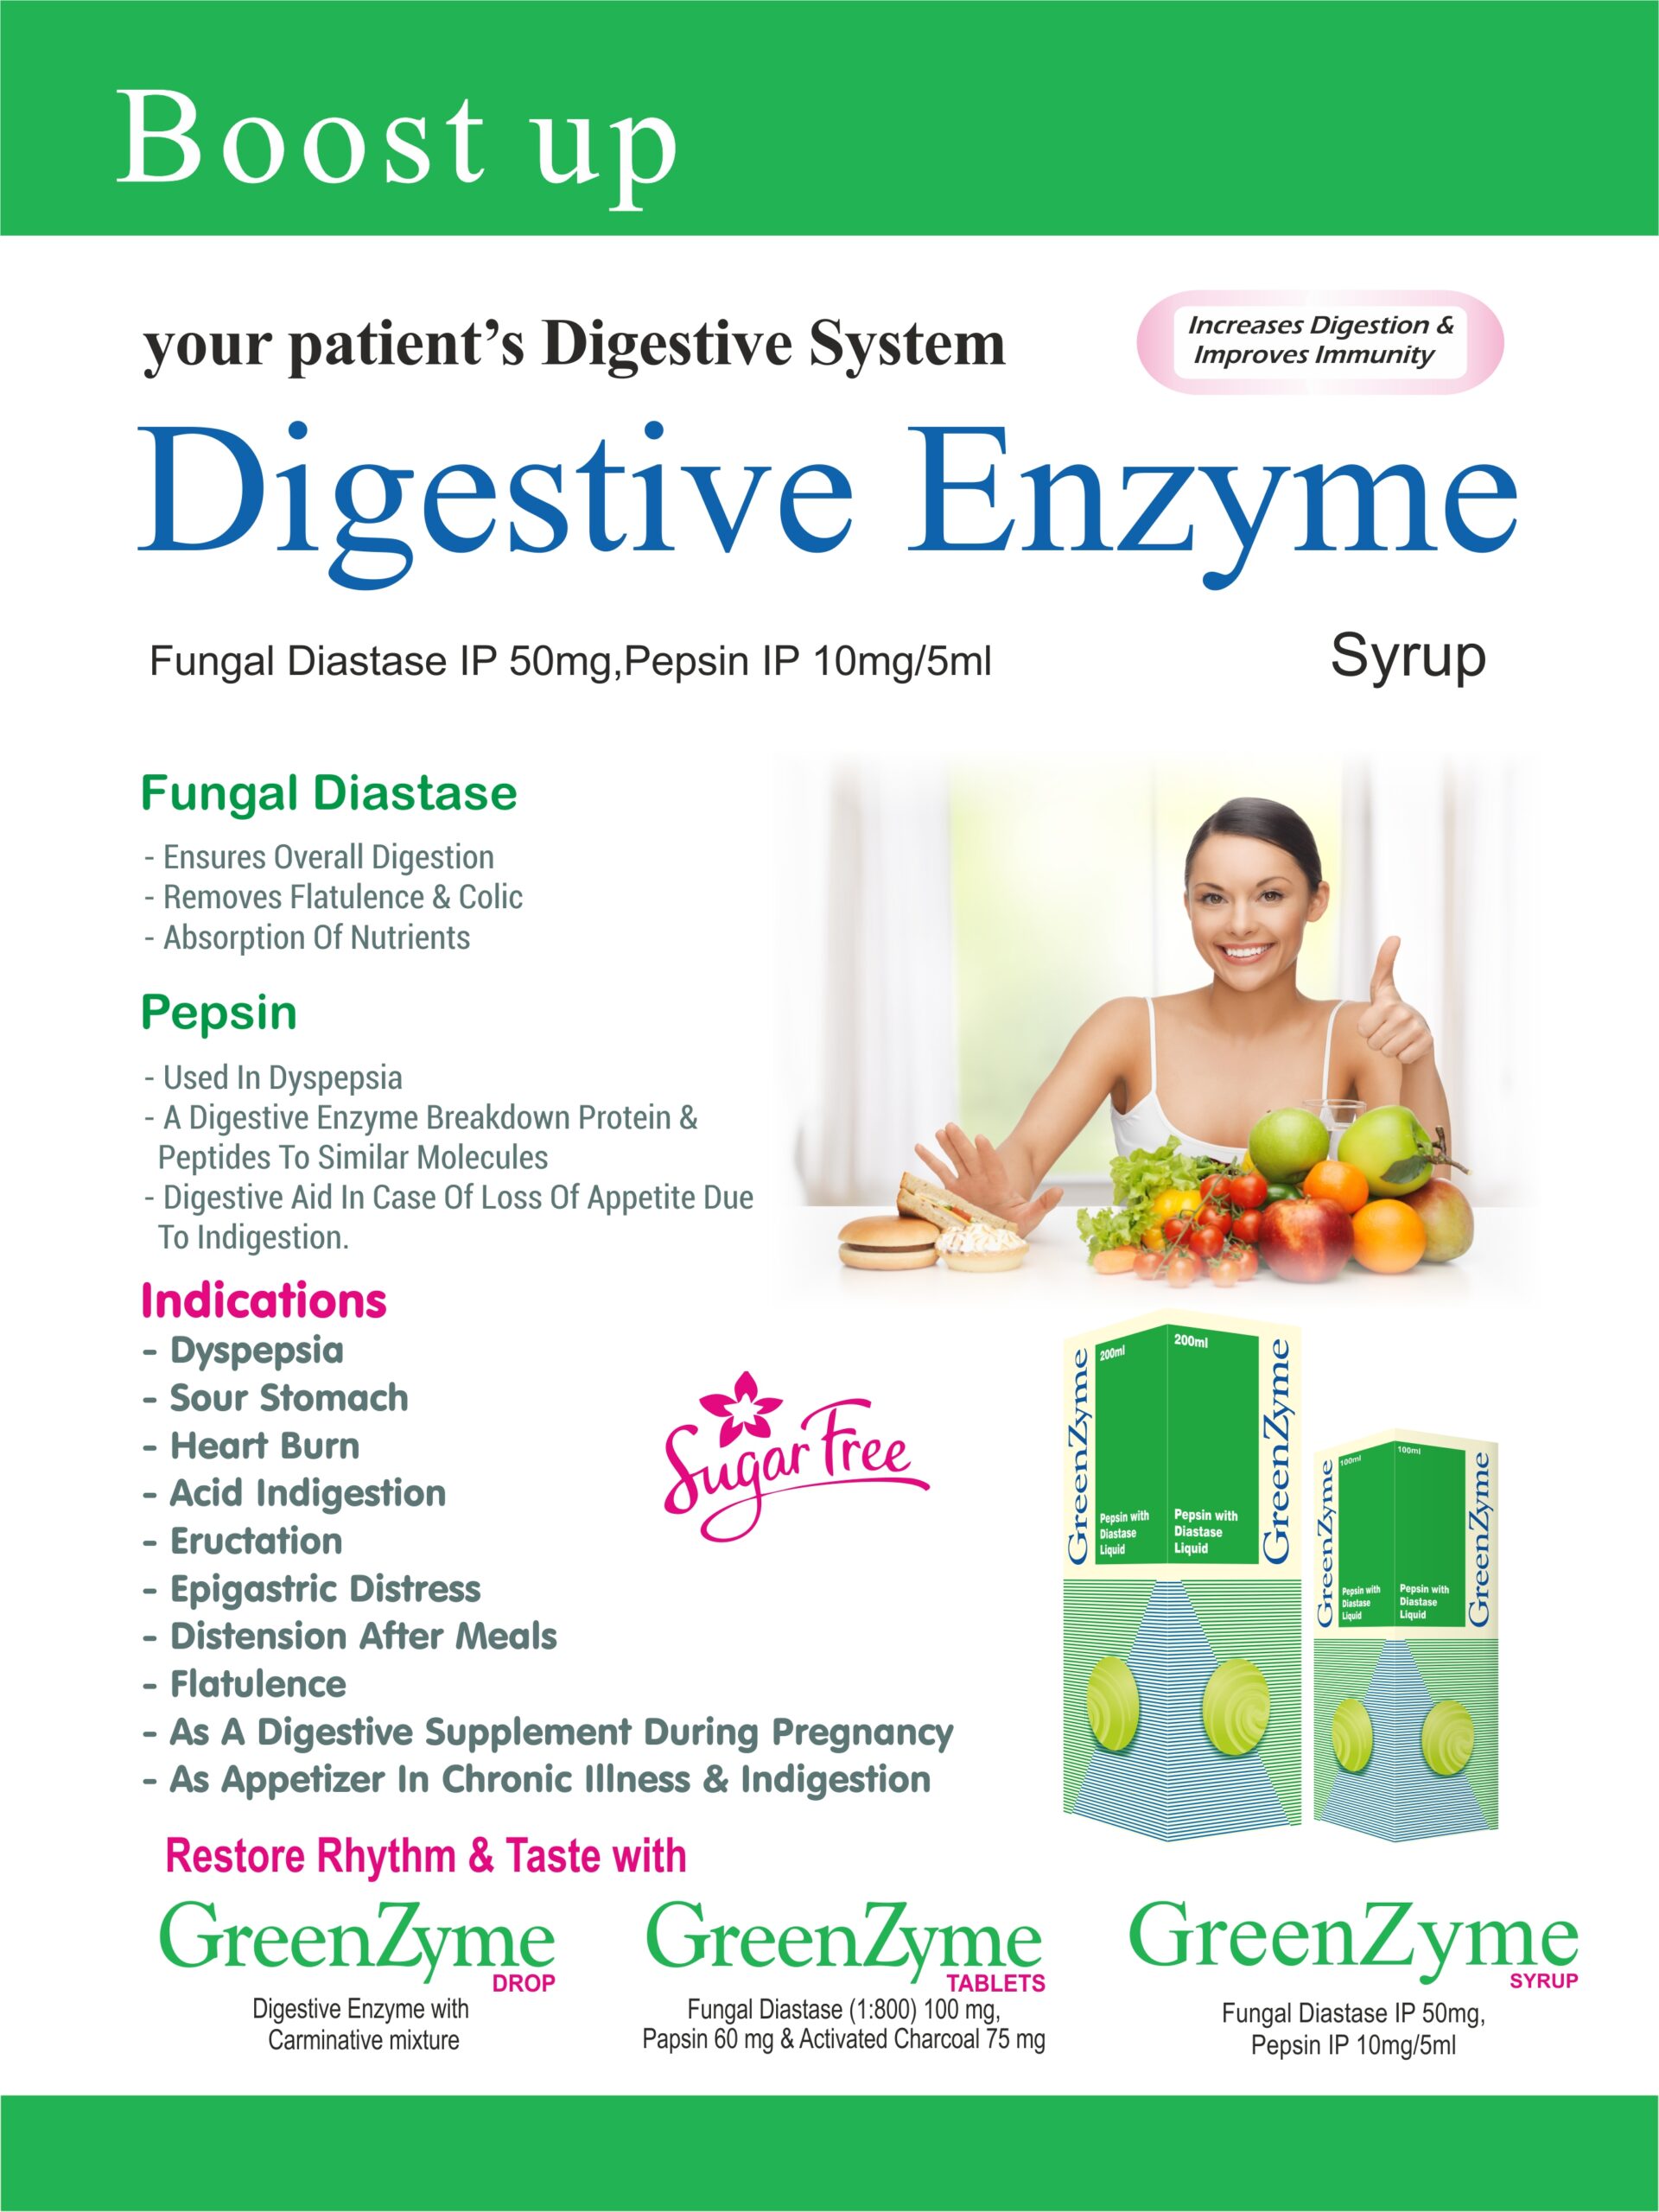 Digestive Enzymes Syrup - Uses, Side effects, Detail information